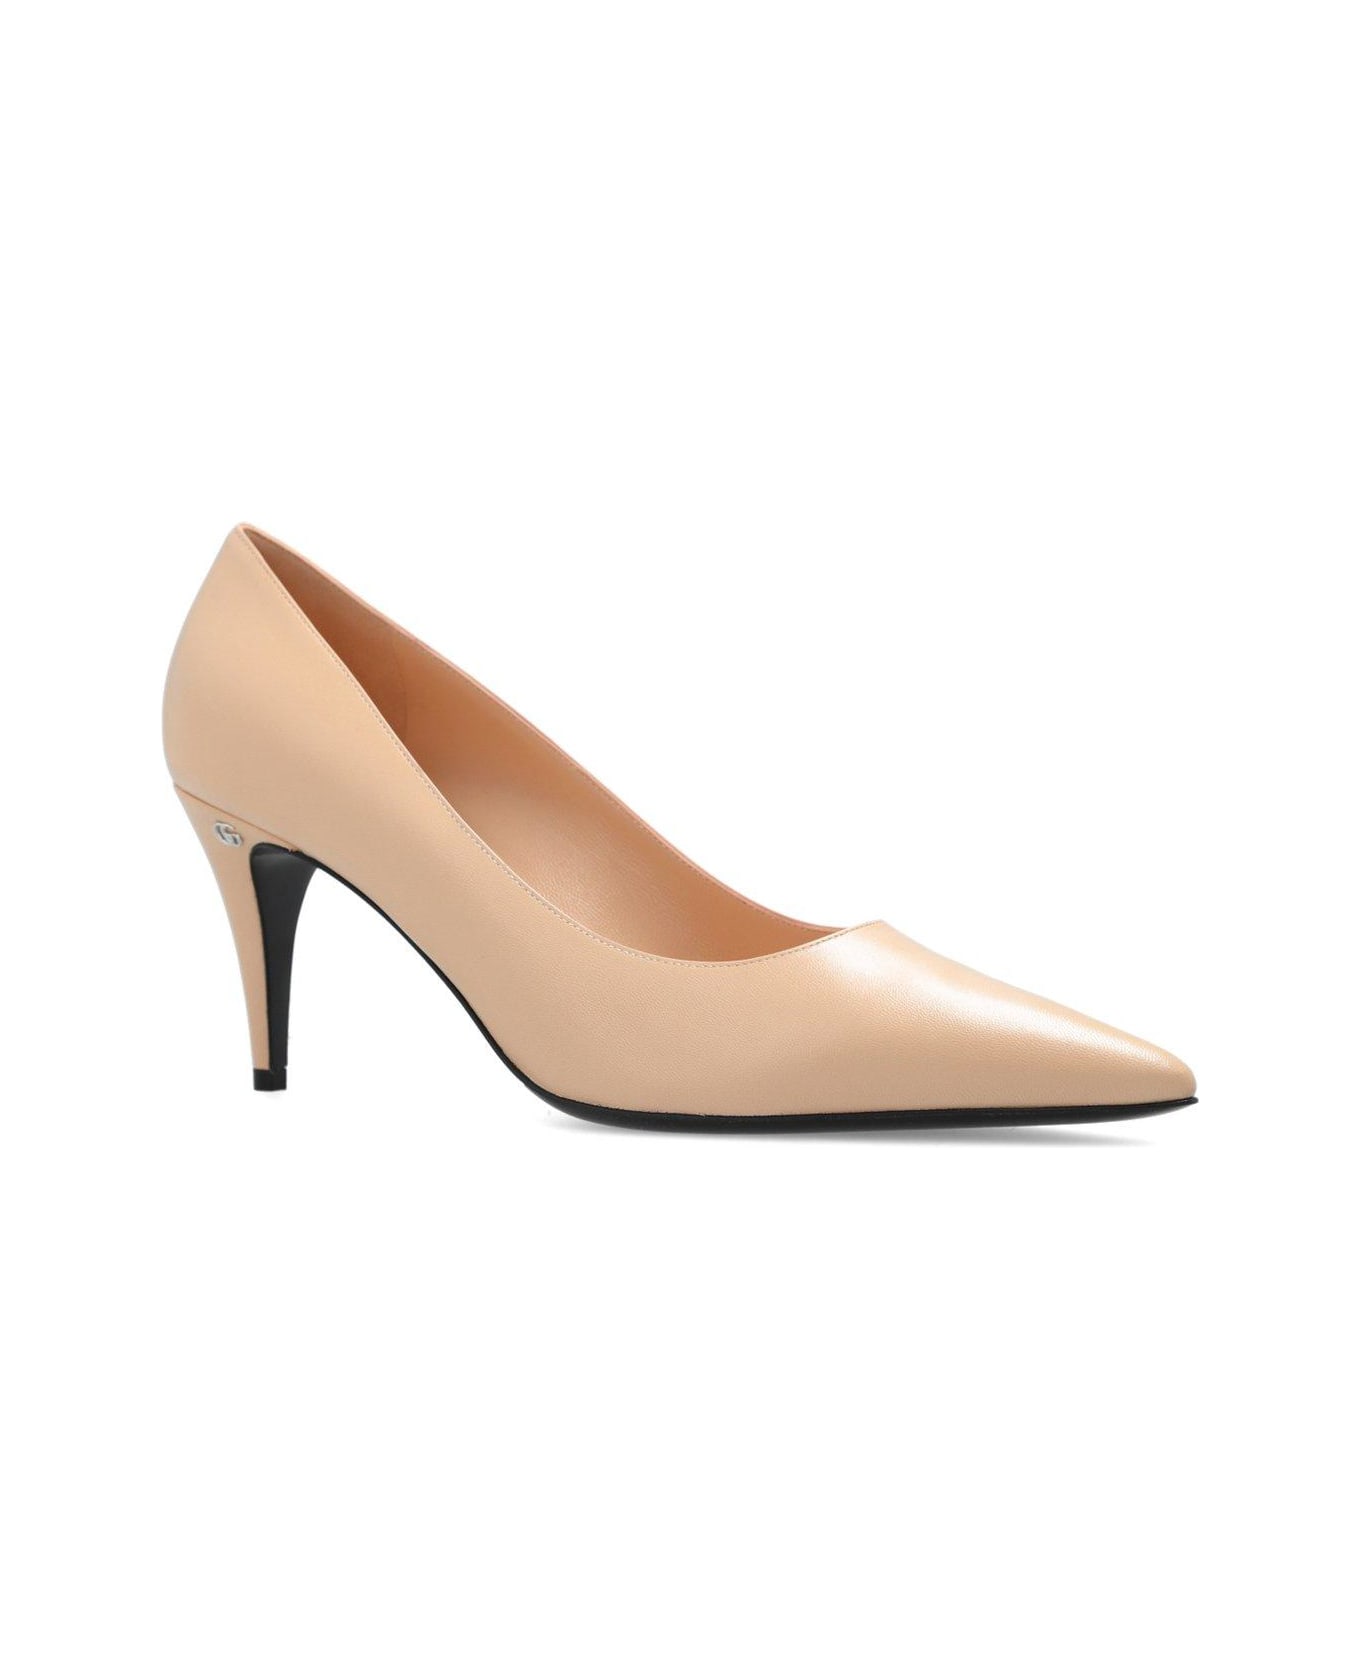 Gucci Pointed Toe Slip-on Pumps - Powder